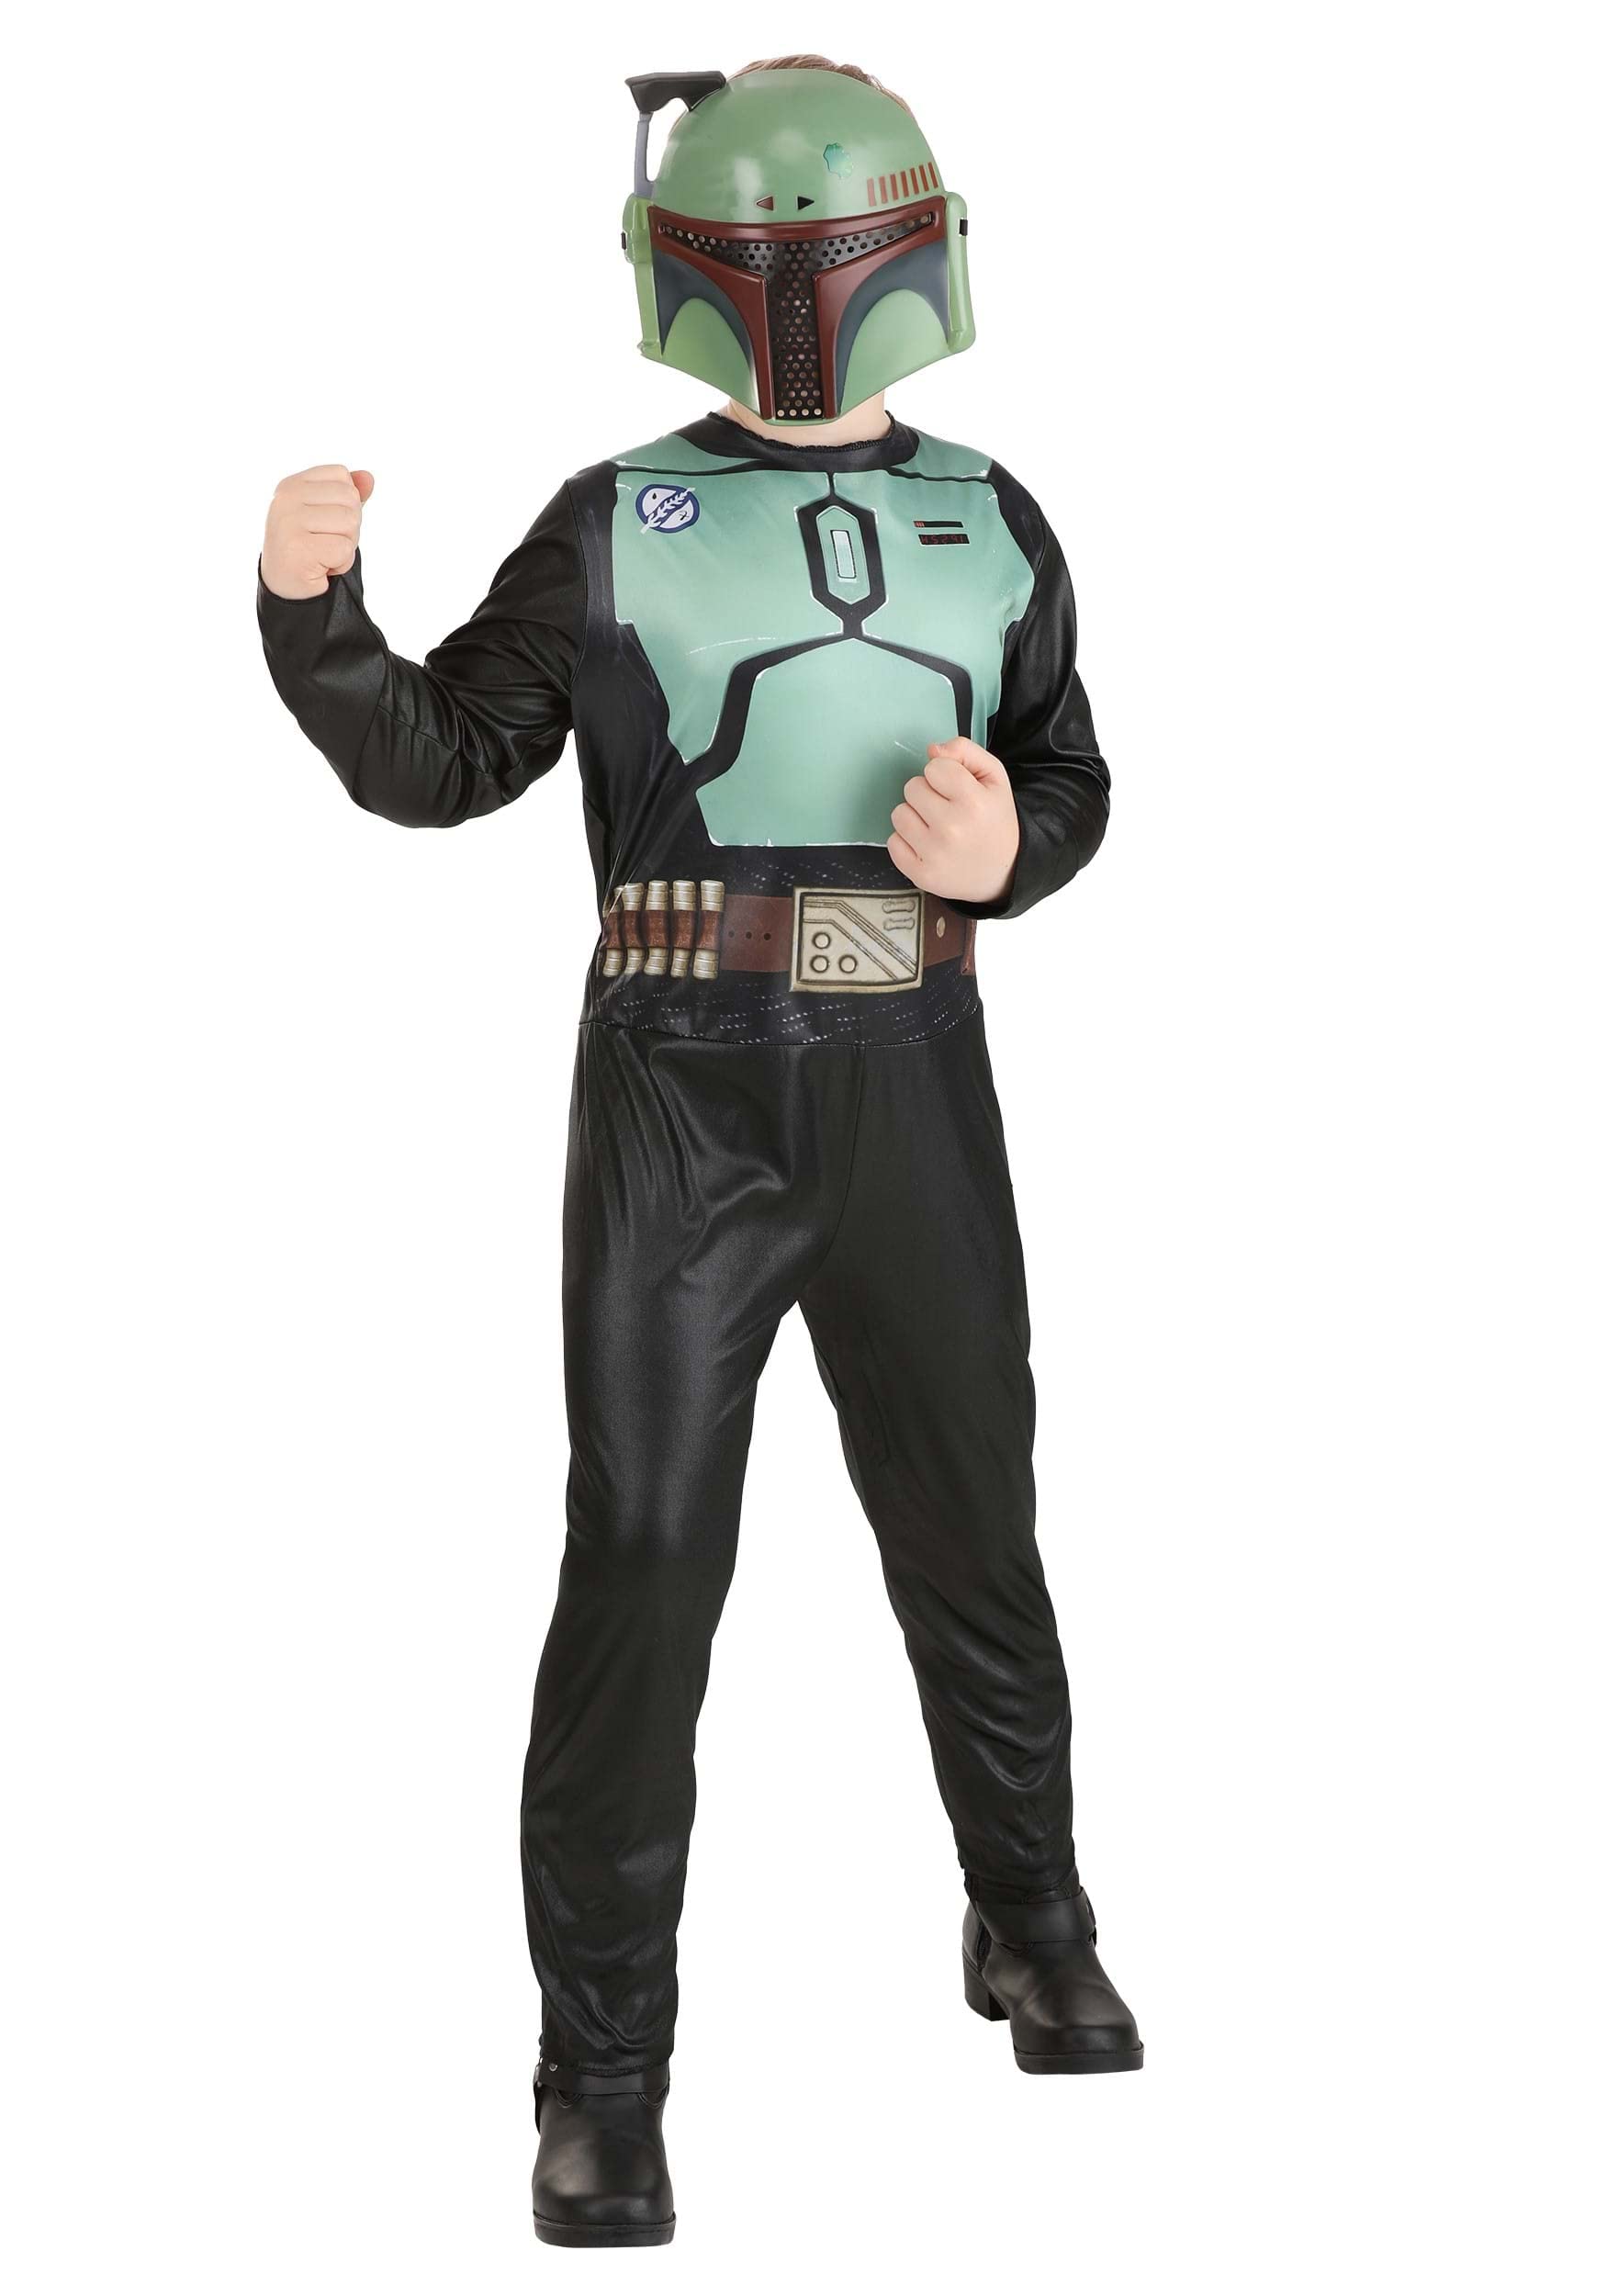 STAR WARS Boba Fett Official Youth Costume w/ Printed Jumpsuit & Plastic Mask (Boy's Medium) $6.85 + Free Shipping w/ Prime or on $35+